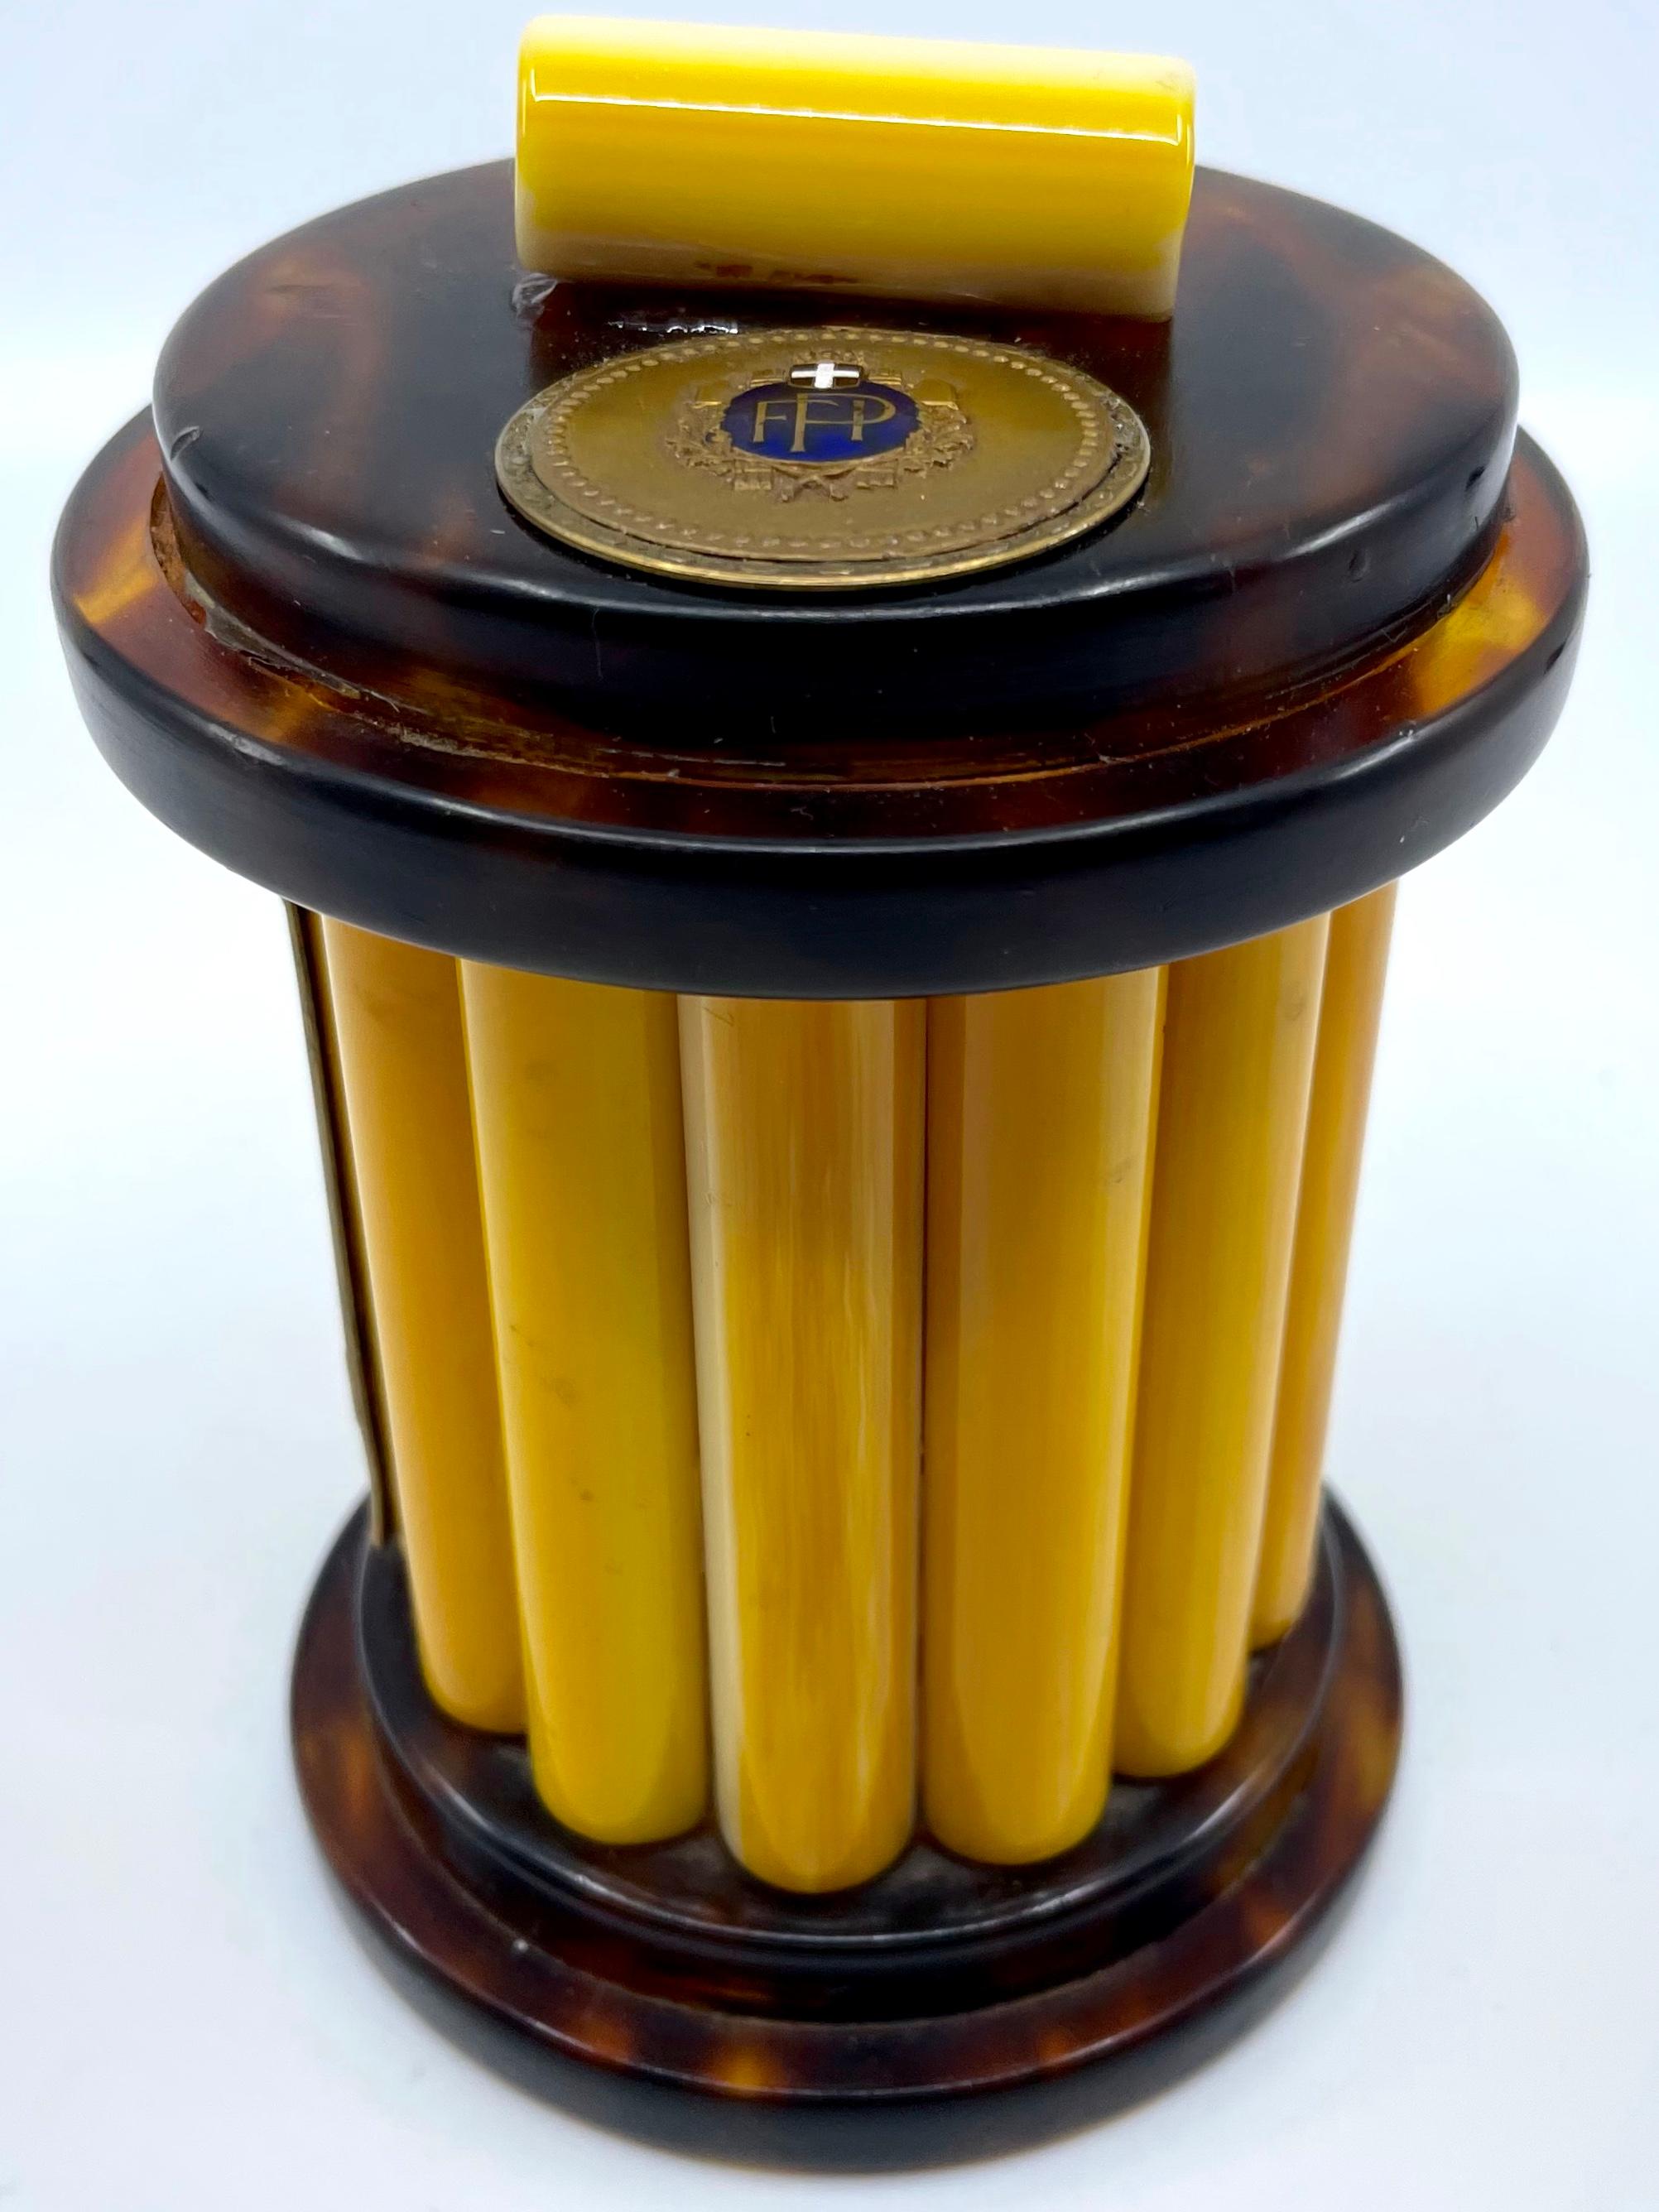 Tortoise bakelite box. Vintage thirties Italian Boxing Federation cigarette box. Faux tortoise and yellow bakelite circular cigarette holder in the form of bound fasces with lid displaying Federazione Pugilistica Italiana medallion and fasces